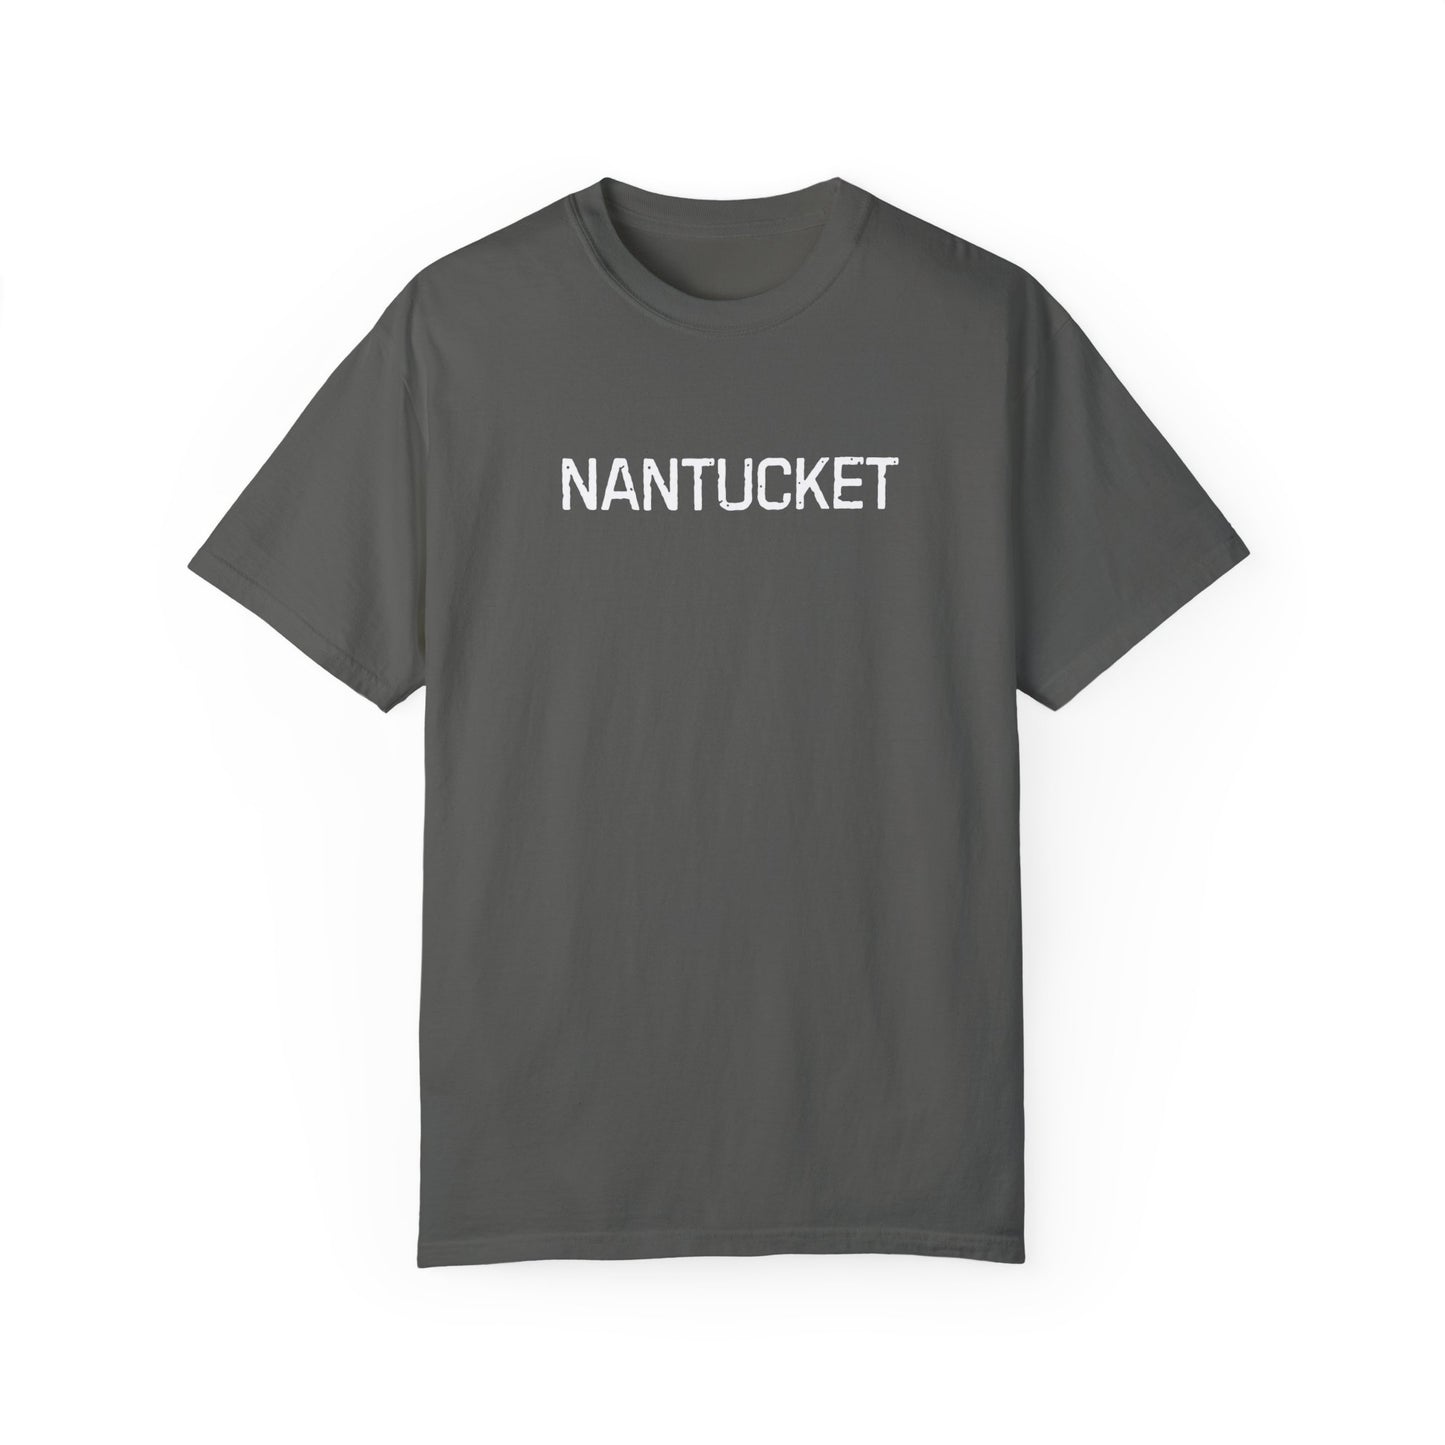 Nantucket Oversized T-Shirt - Comfort Colors 1717, Distressed Look, Pepper Color, 100% Ring-Spun Cotton